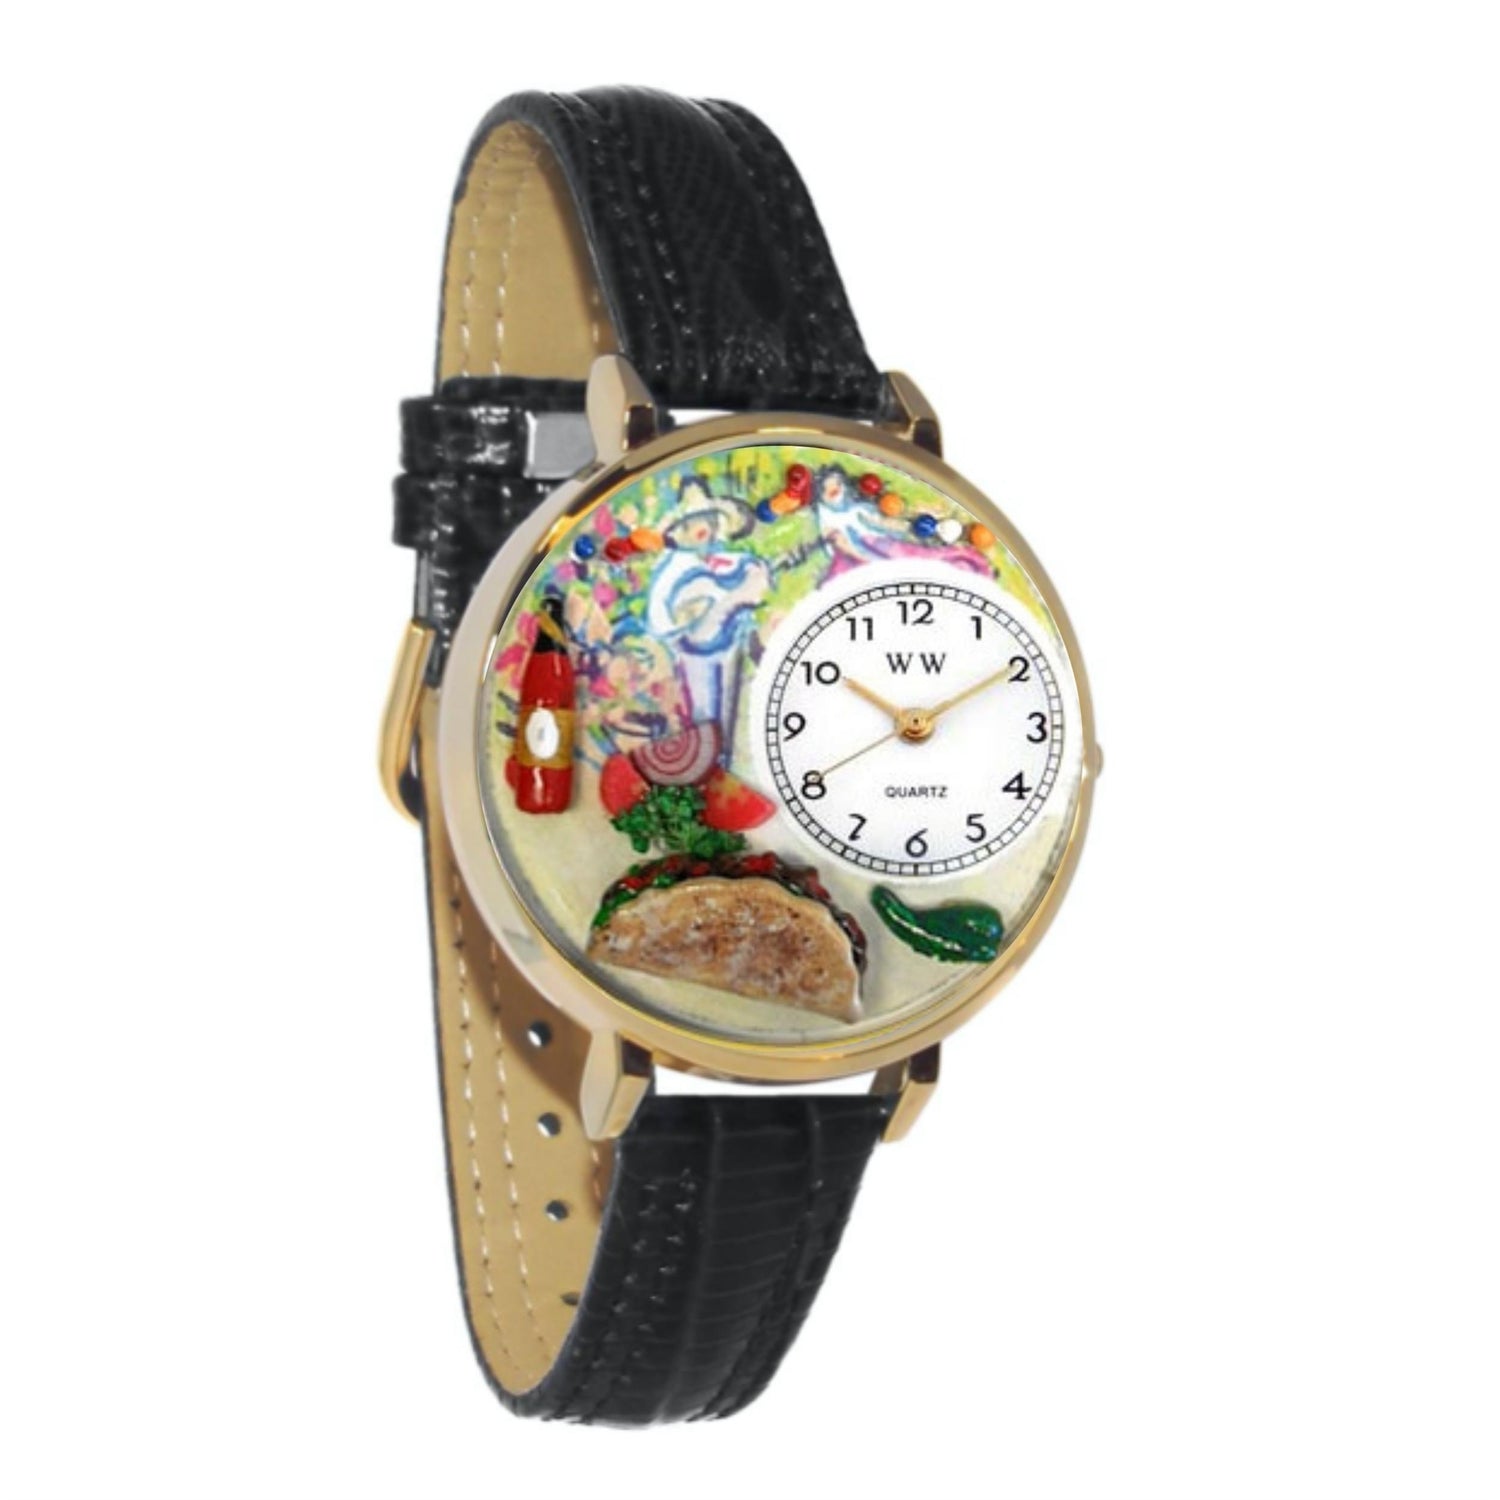 Whimsical Gifts | Taco Lover 3D Watch Large Style | Handmade in USA | Hobbies & Special Interests | Food & Wine | Novelty Unique Fun Miniatures Gift | Gold Finish Black Leather Watch Band